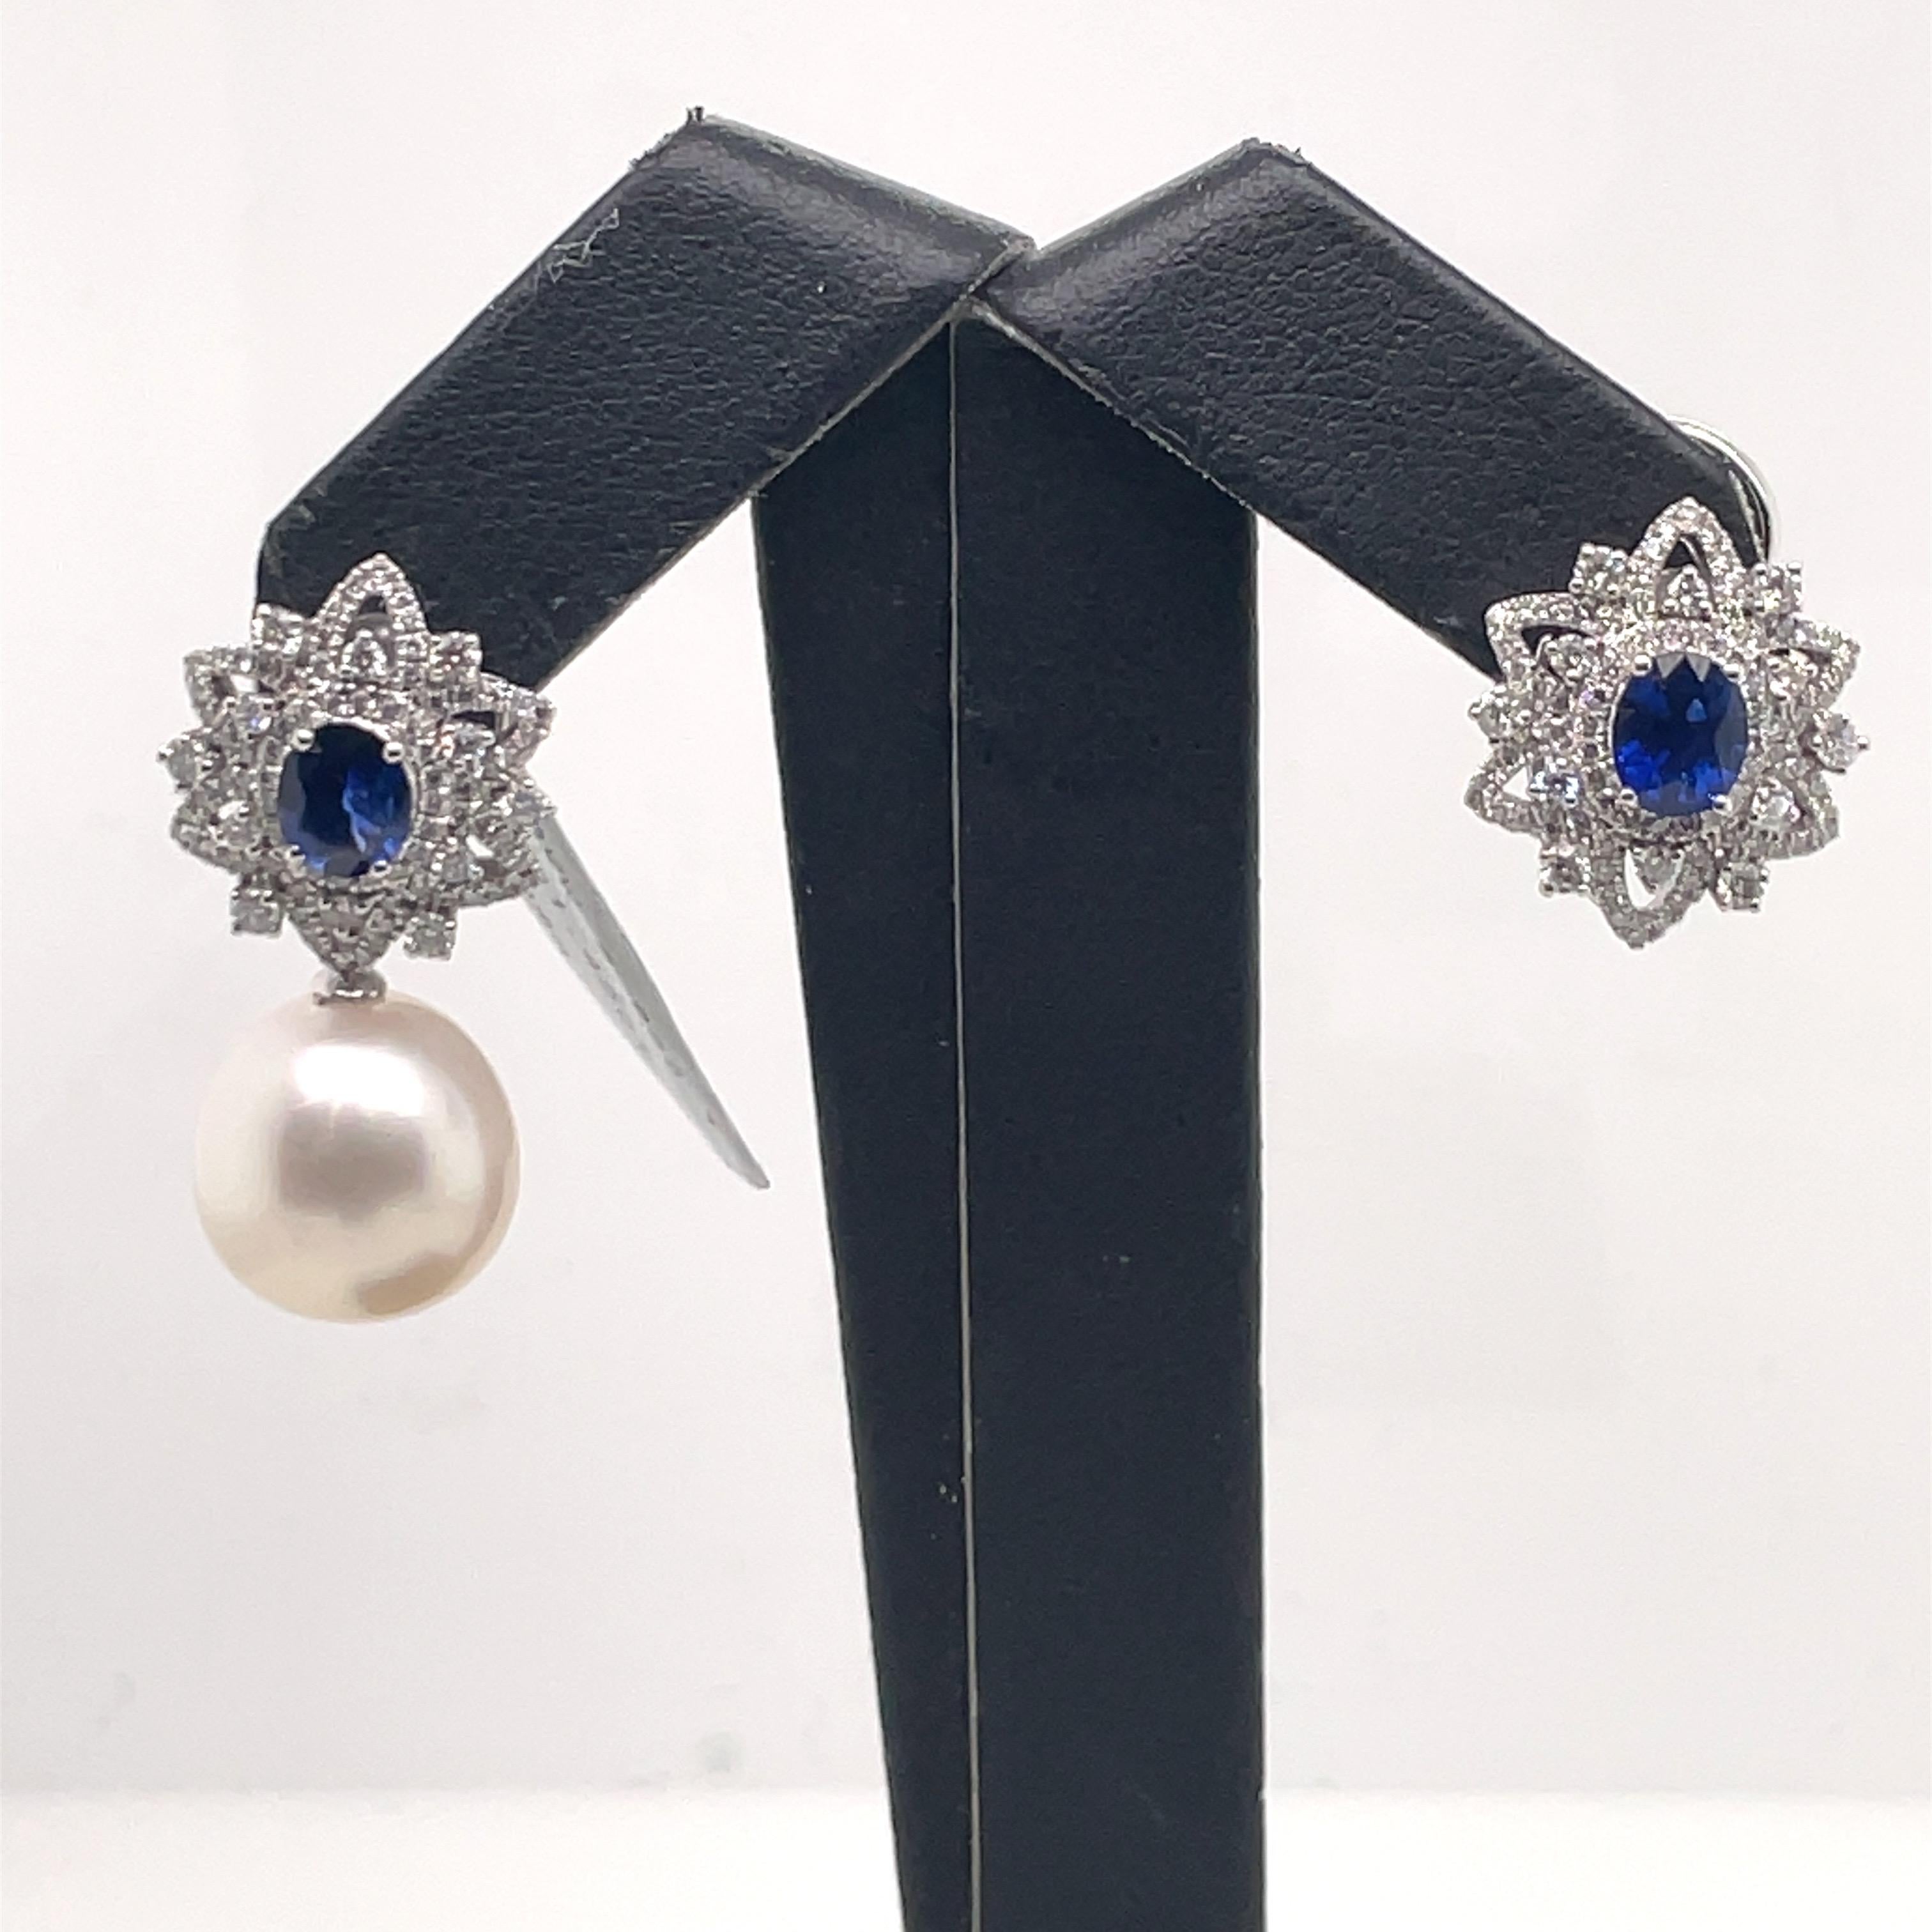 18 Karat white gold earrings featuring two blue Sapphires weighing 1.45 carats flanked with round brilliants in a floral motif weighing 1 carats and two white South Sea Pearls measuring 12-13 MM.

Earrings can be worn as a stud or drop earring.